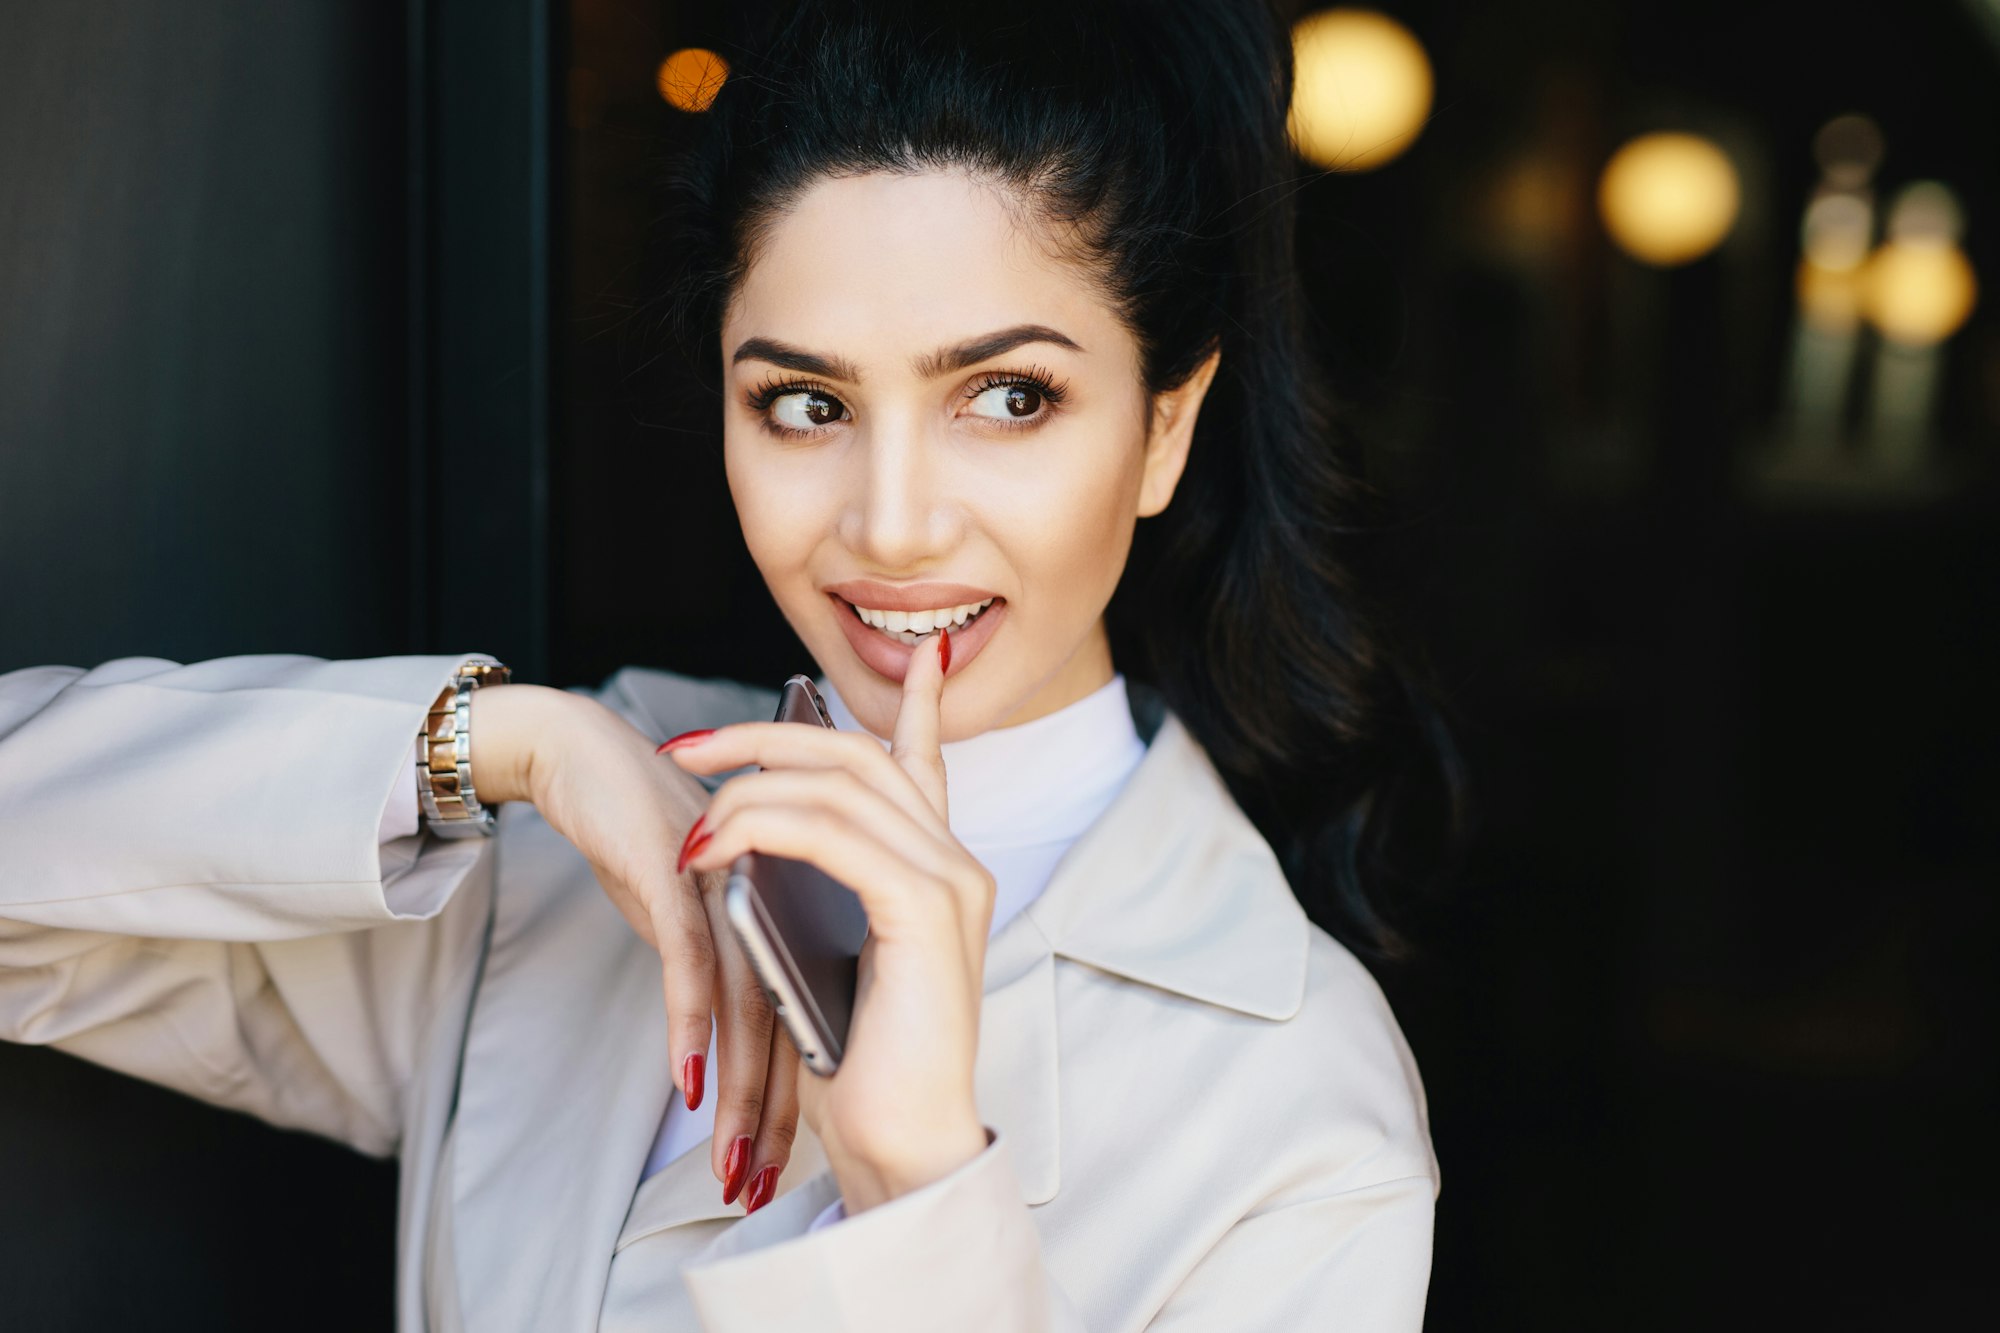 Adorable woman with appealing eyes, make-up, holding her finger on white teeth holding smartphone